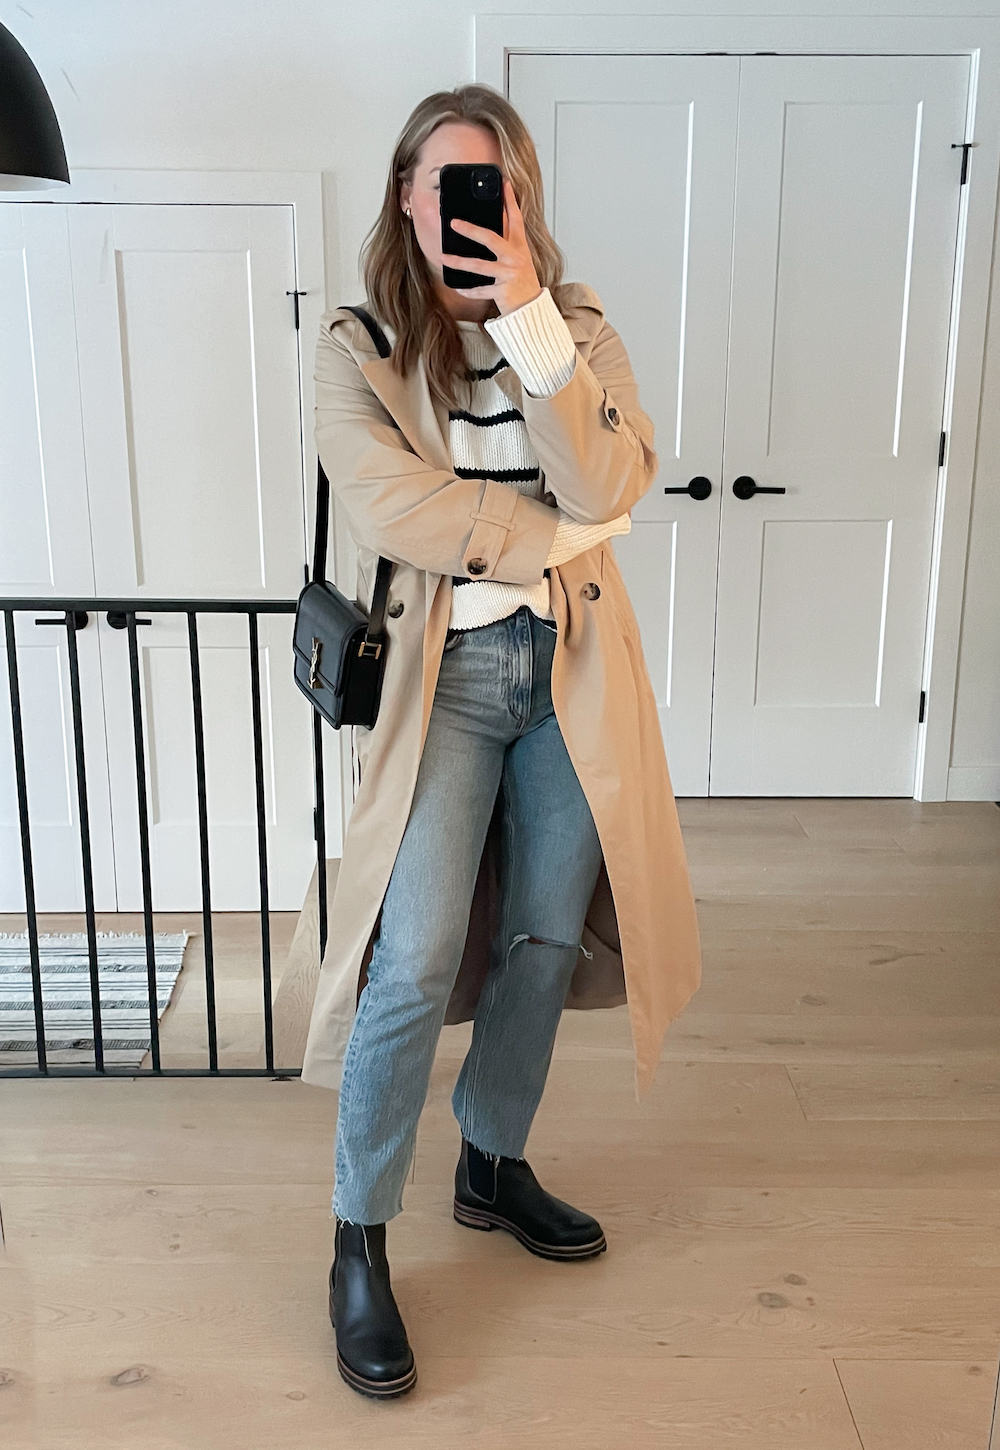 Christal wearing straight jeans with black Chelsea boots, a black and white stripped sweater and a tan trench coat.